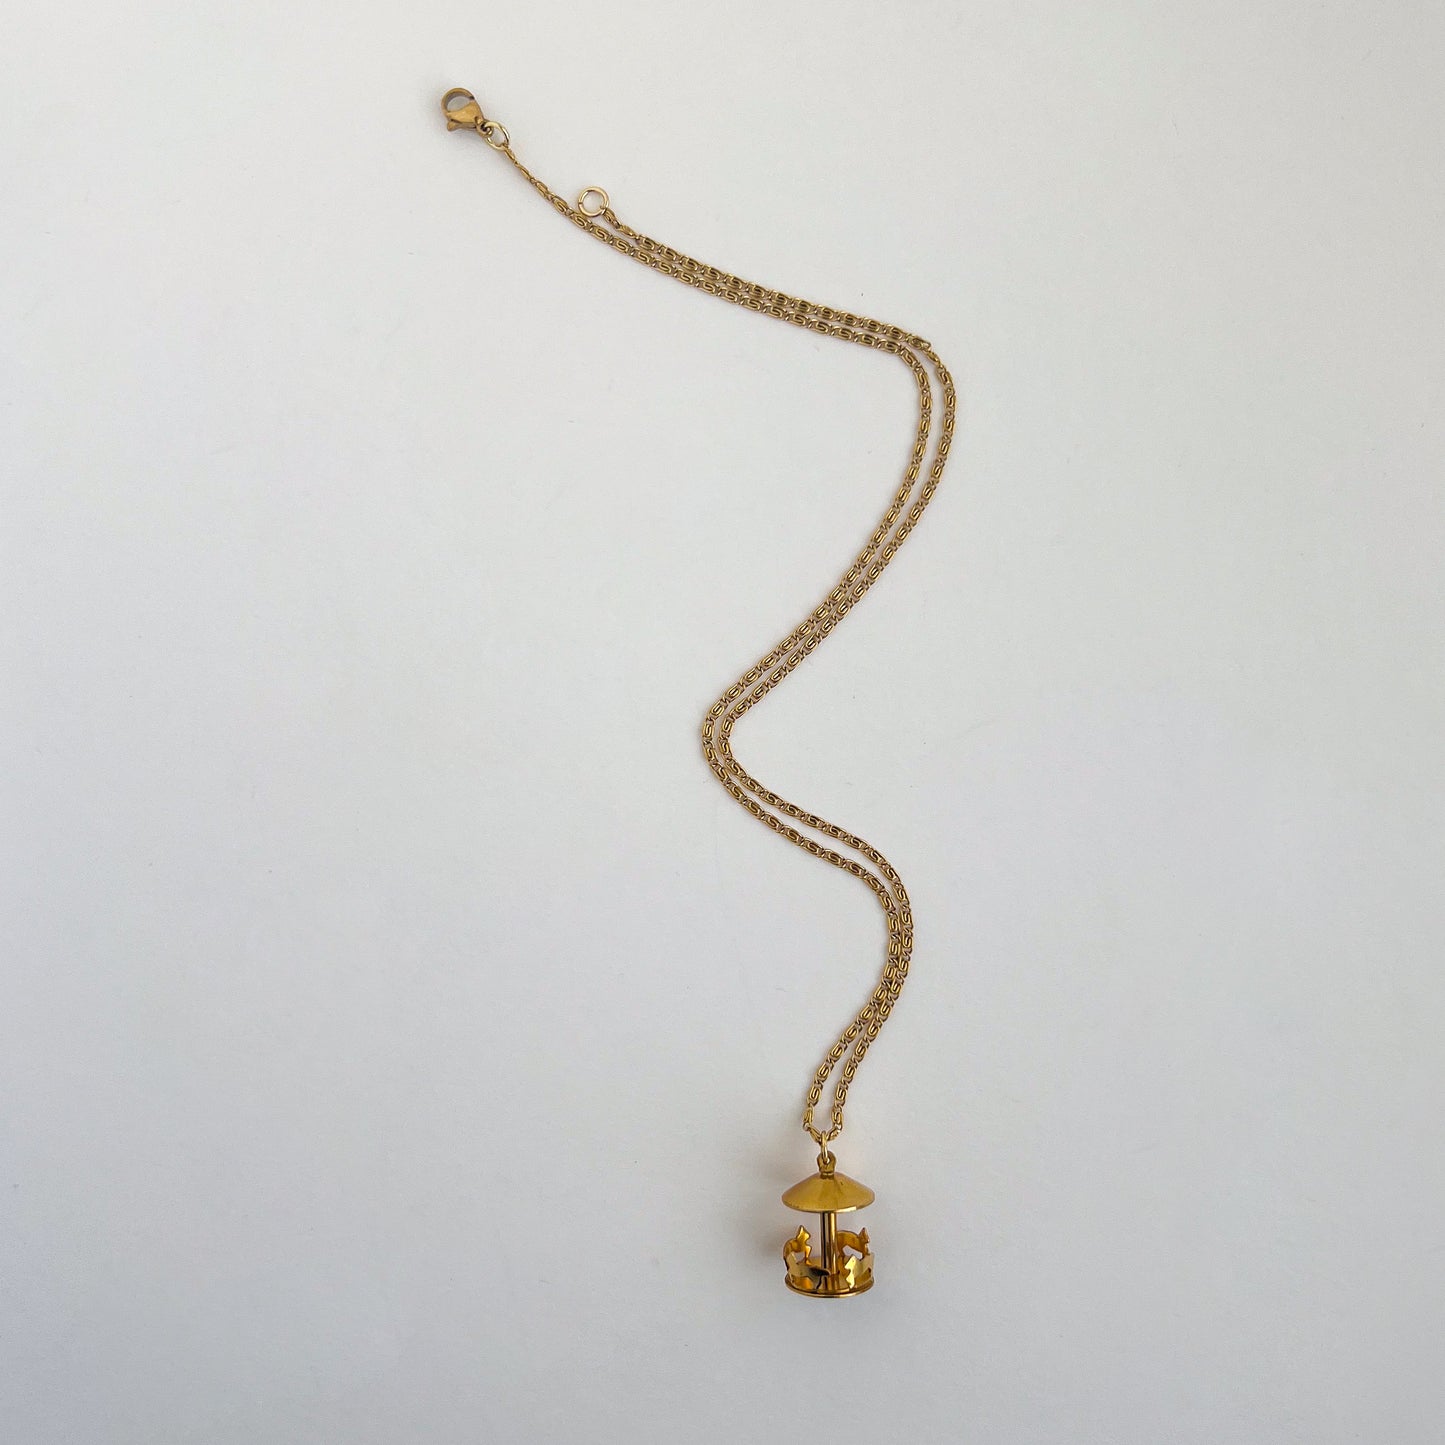 Moveable Carousal Pendant Necklace